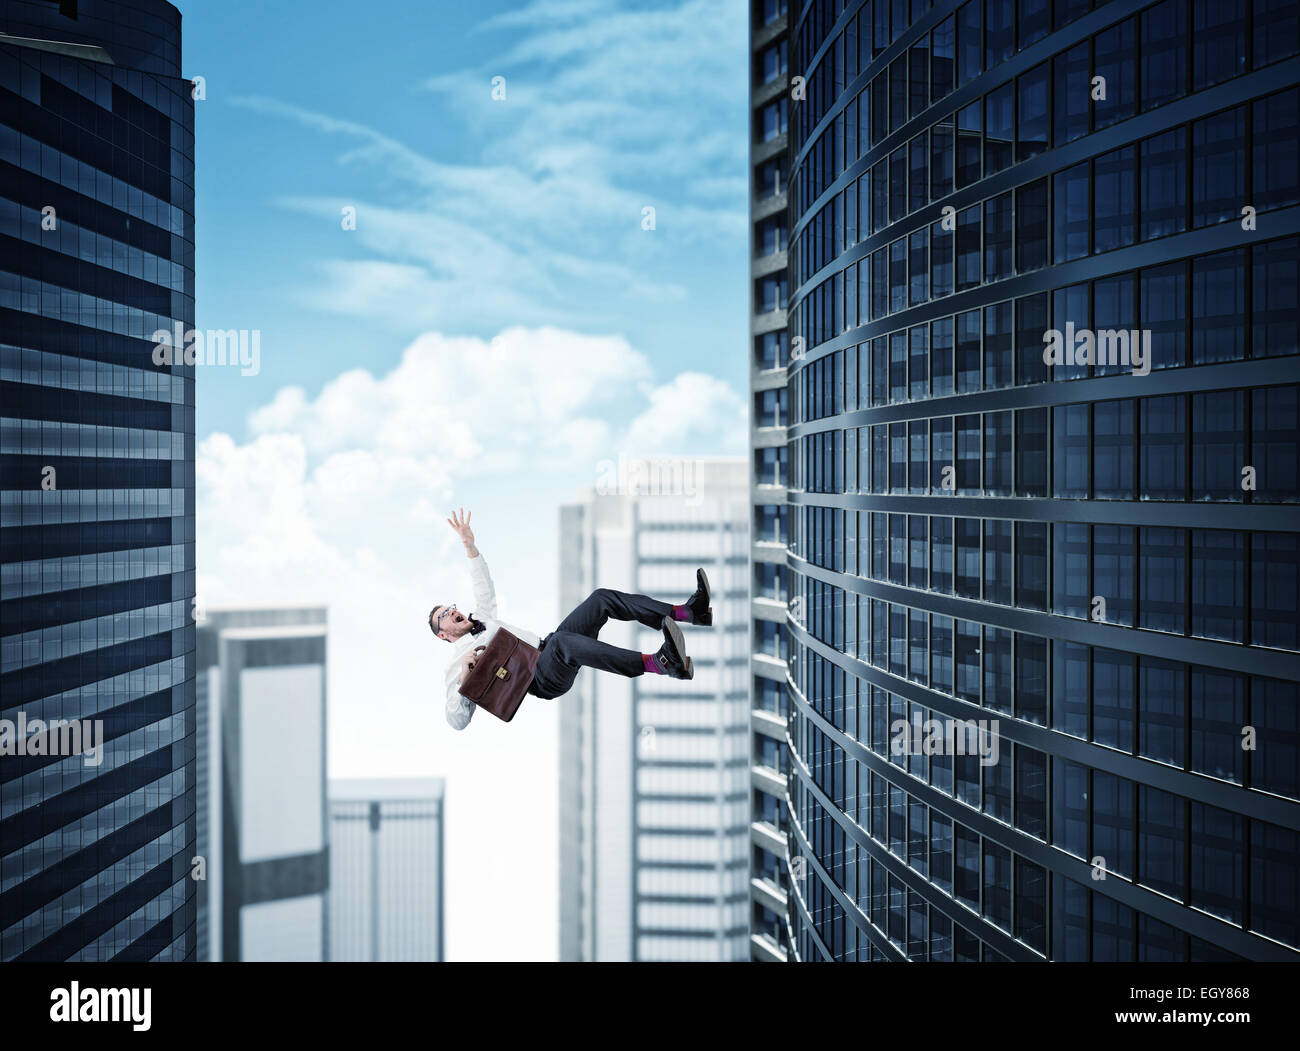 skyscaper background and falling business man Stock Photo